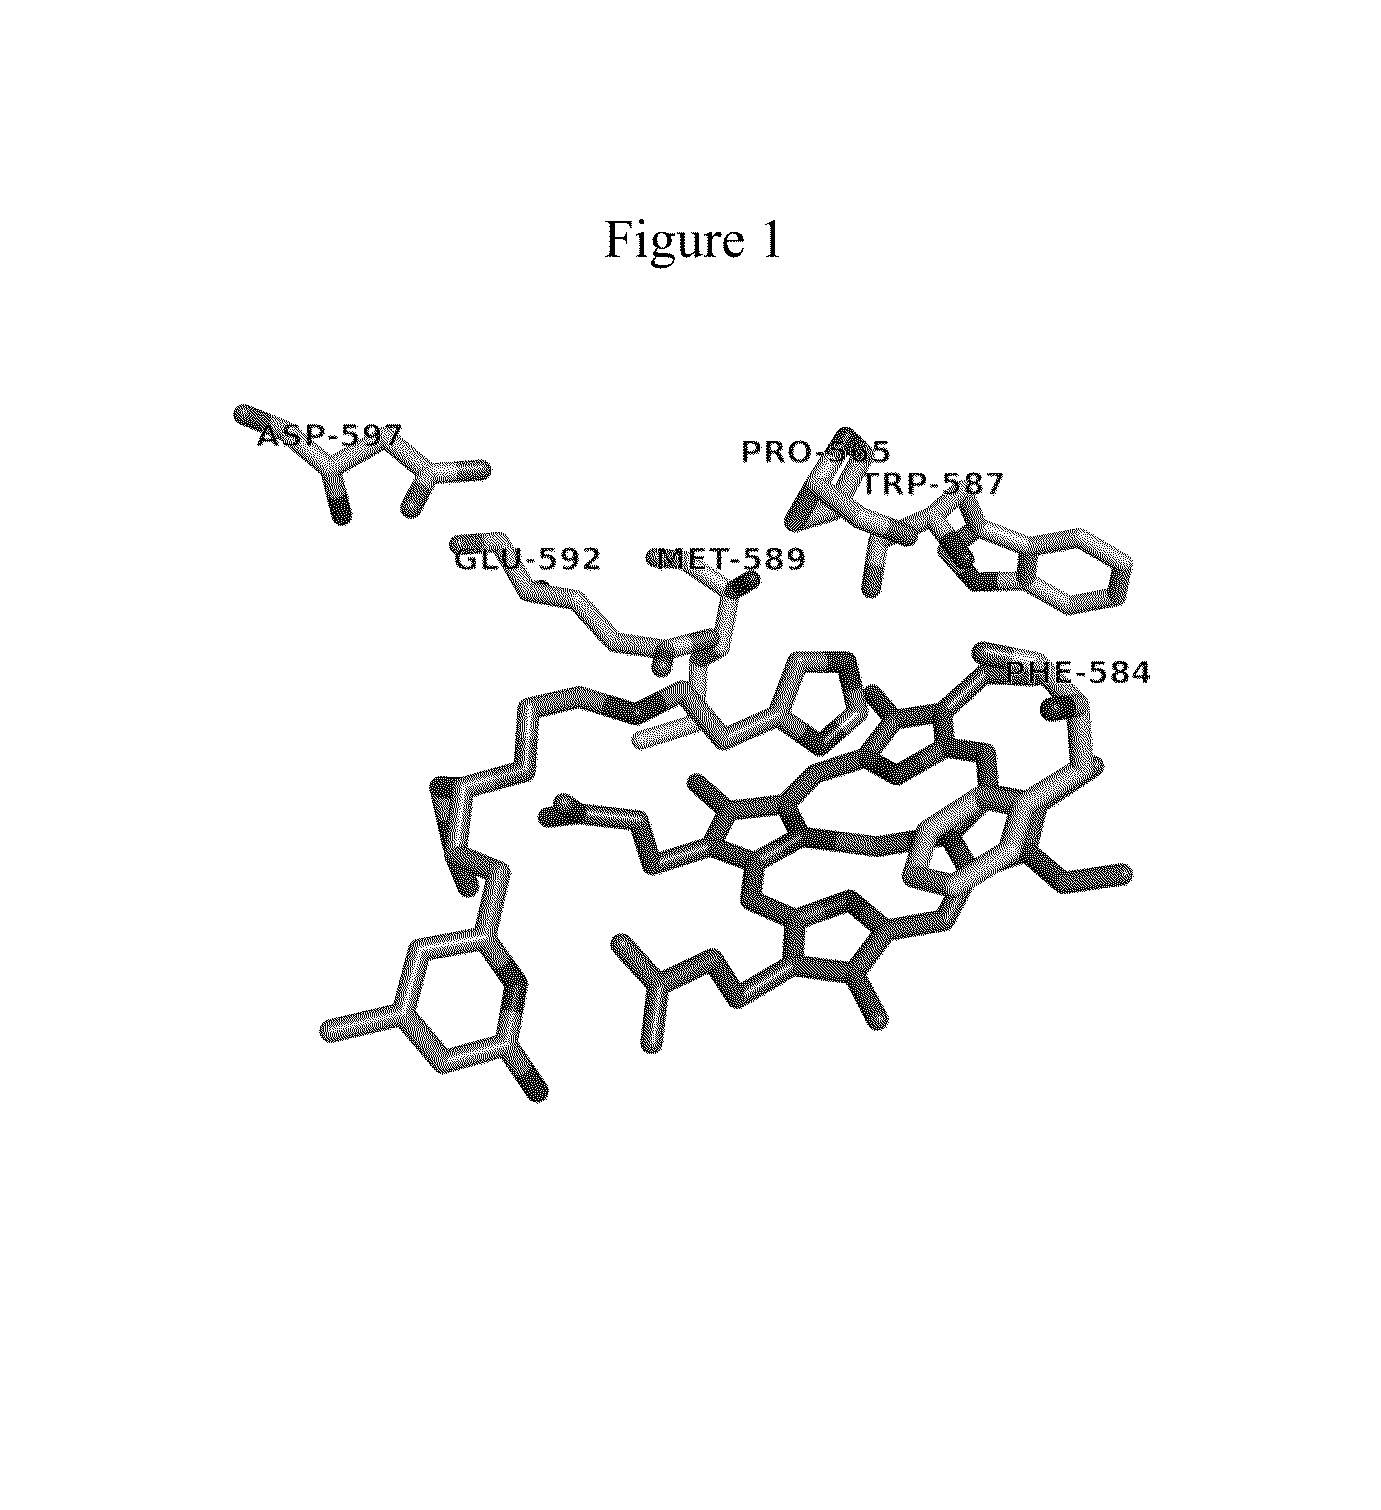 Selective neuronal nitric oxide synthase inhibitors with azole substituents